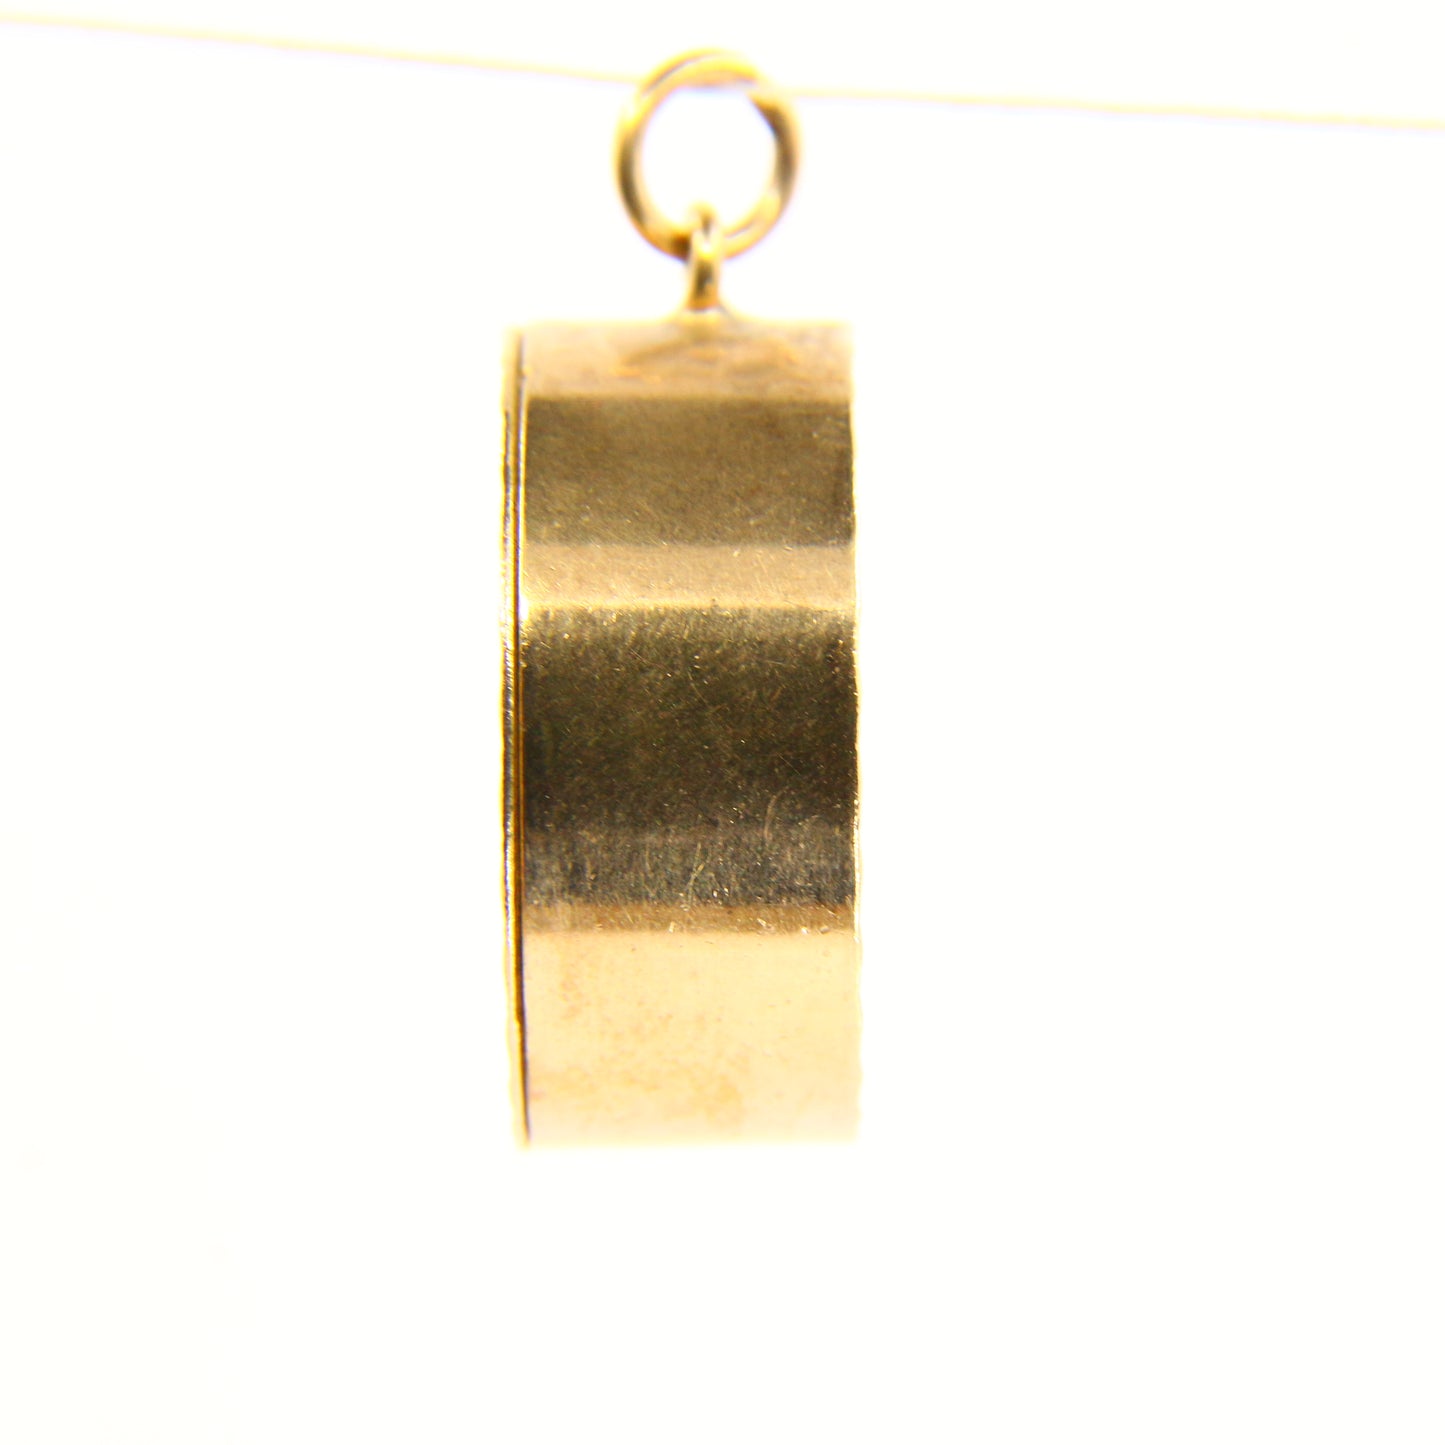 Vintage 9ct Lucky Note Charm Old UK £1 Pendant Charm Yellow Gold Hallmarked